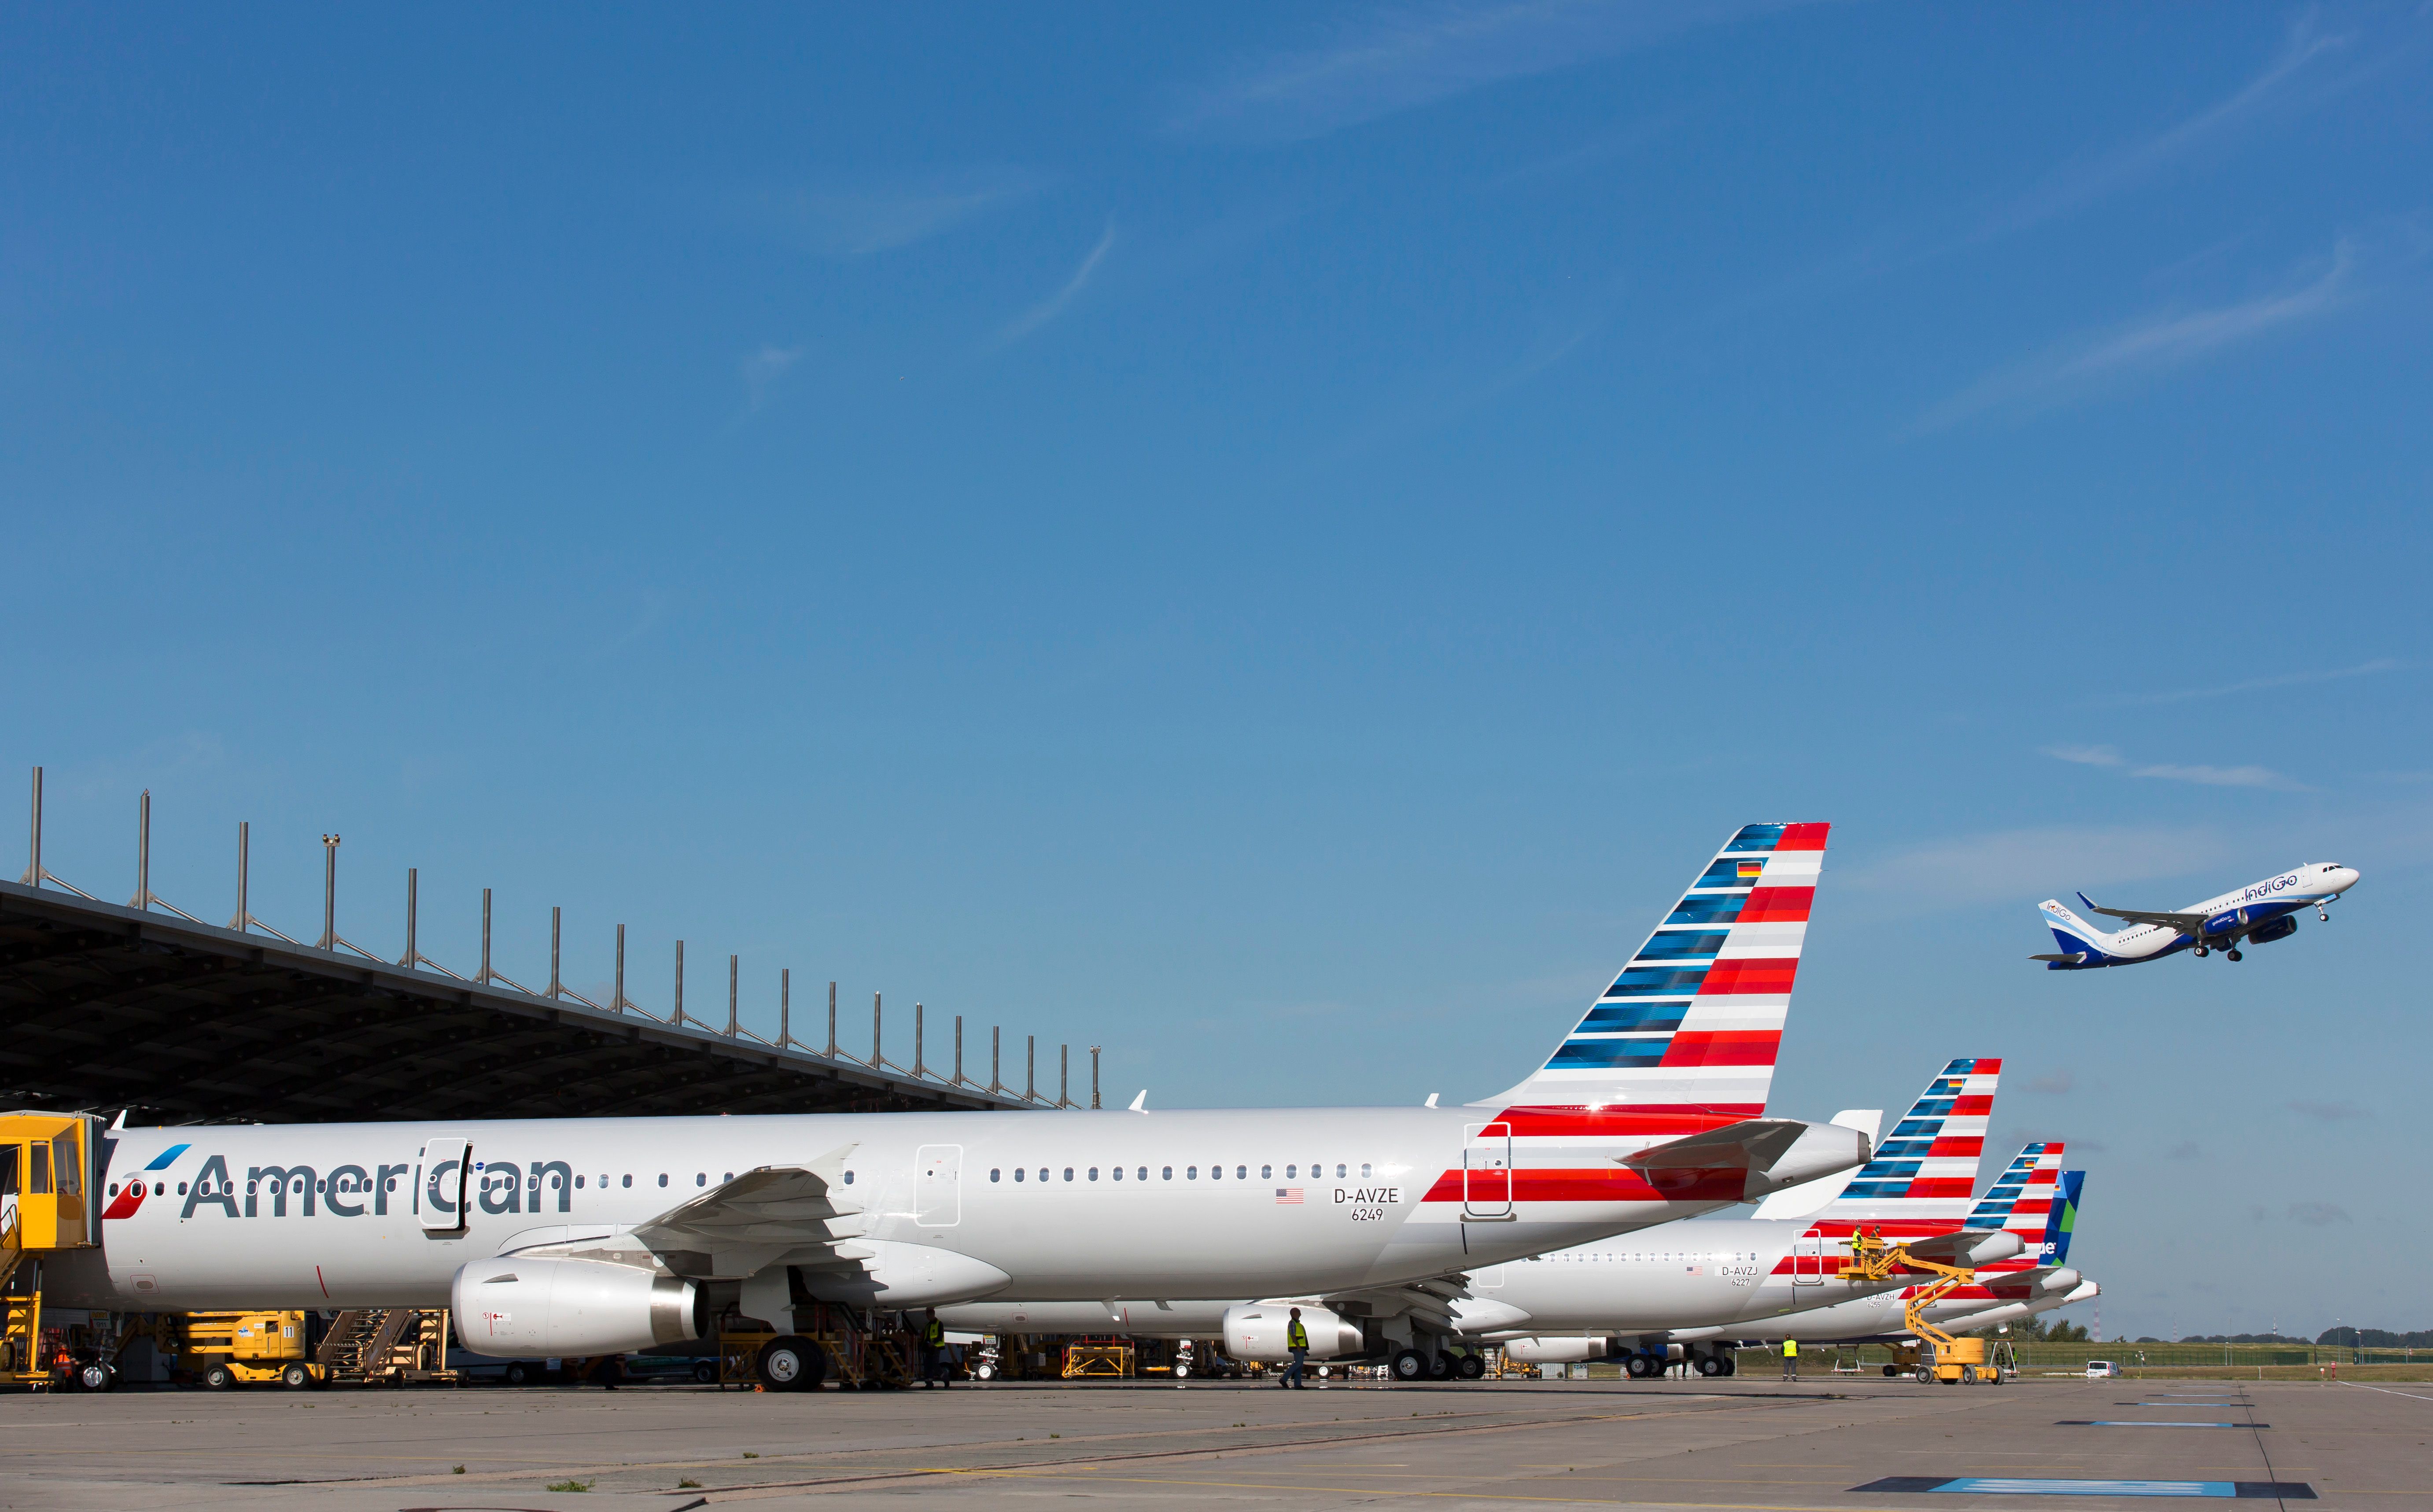 American Airlines airplanes parked at the airport